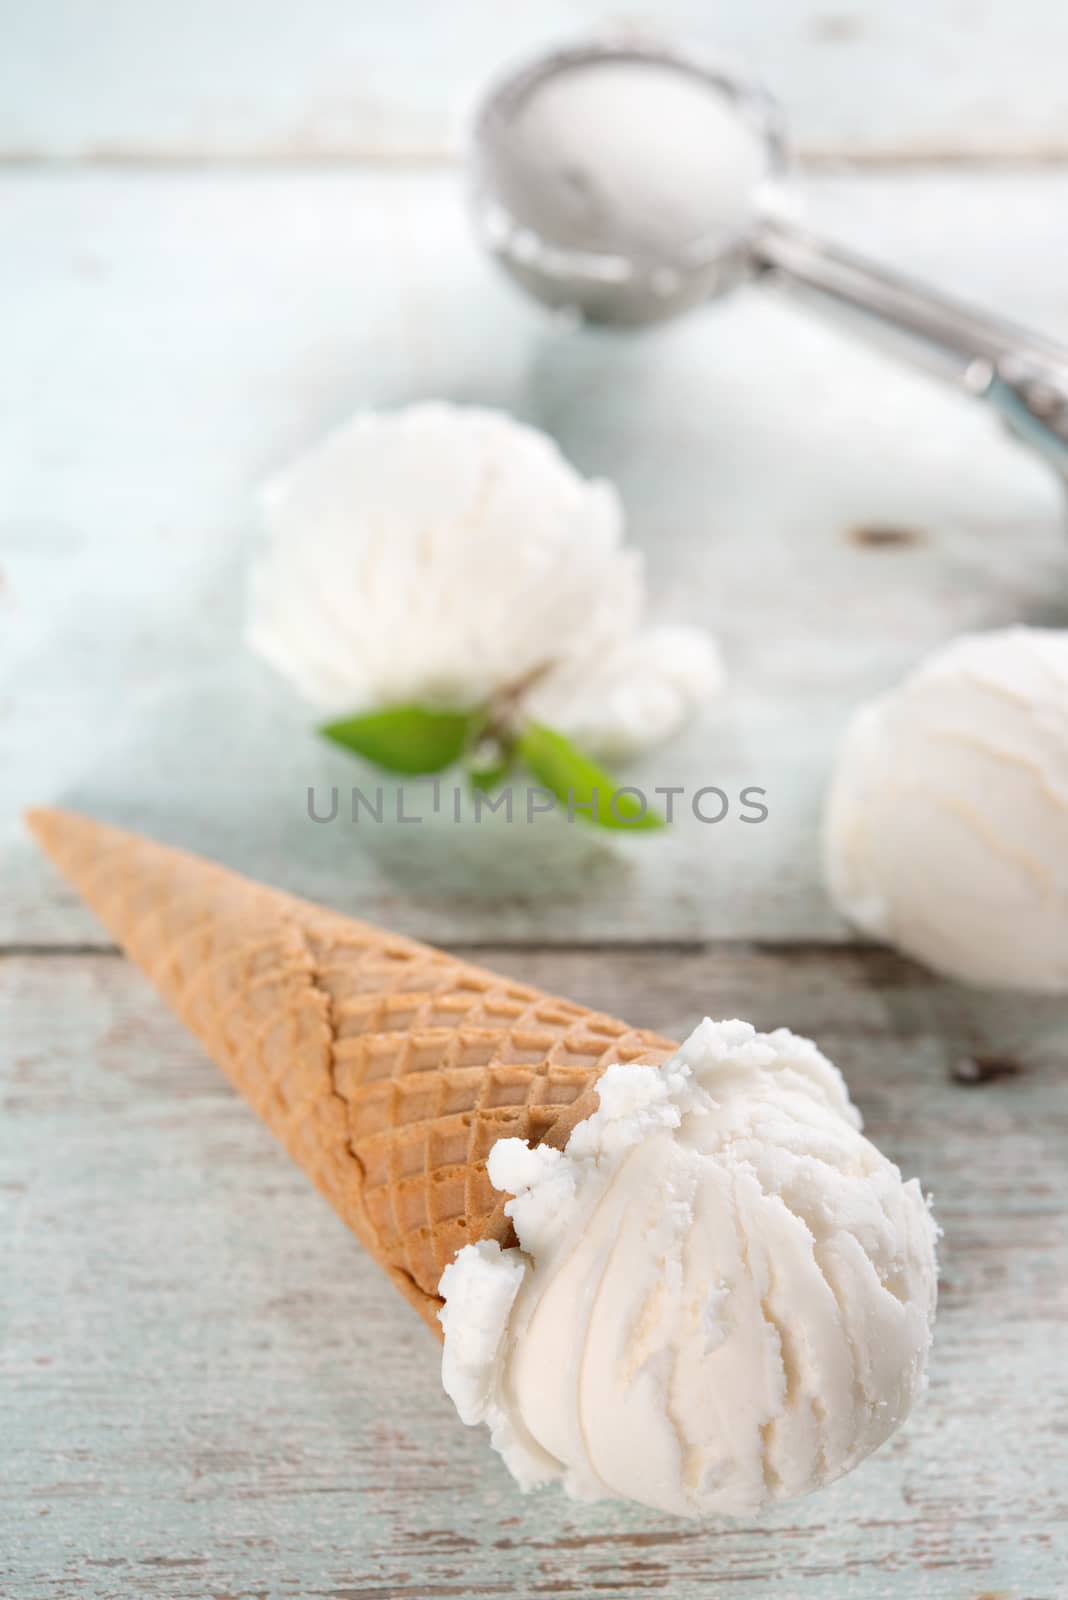 Scoop coconut ice cream in waffle cone with utensil on wood background.